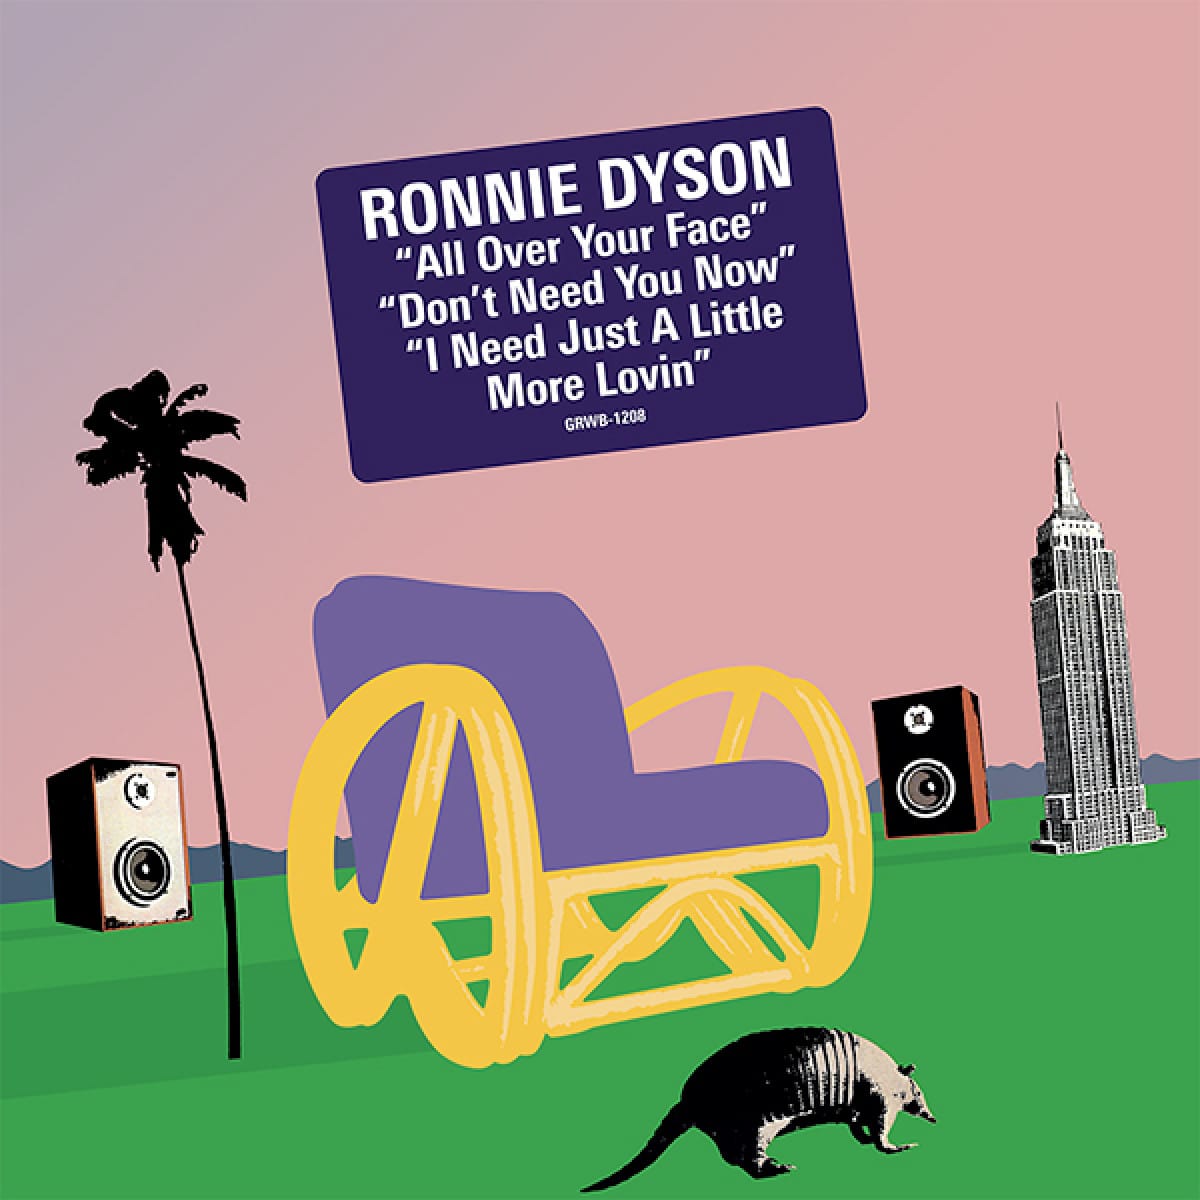 Ronnie Dyson - All Over Your Face - GRWB-1208 - GROOVIN RECORDS